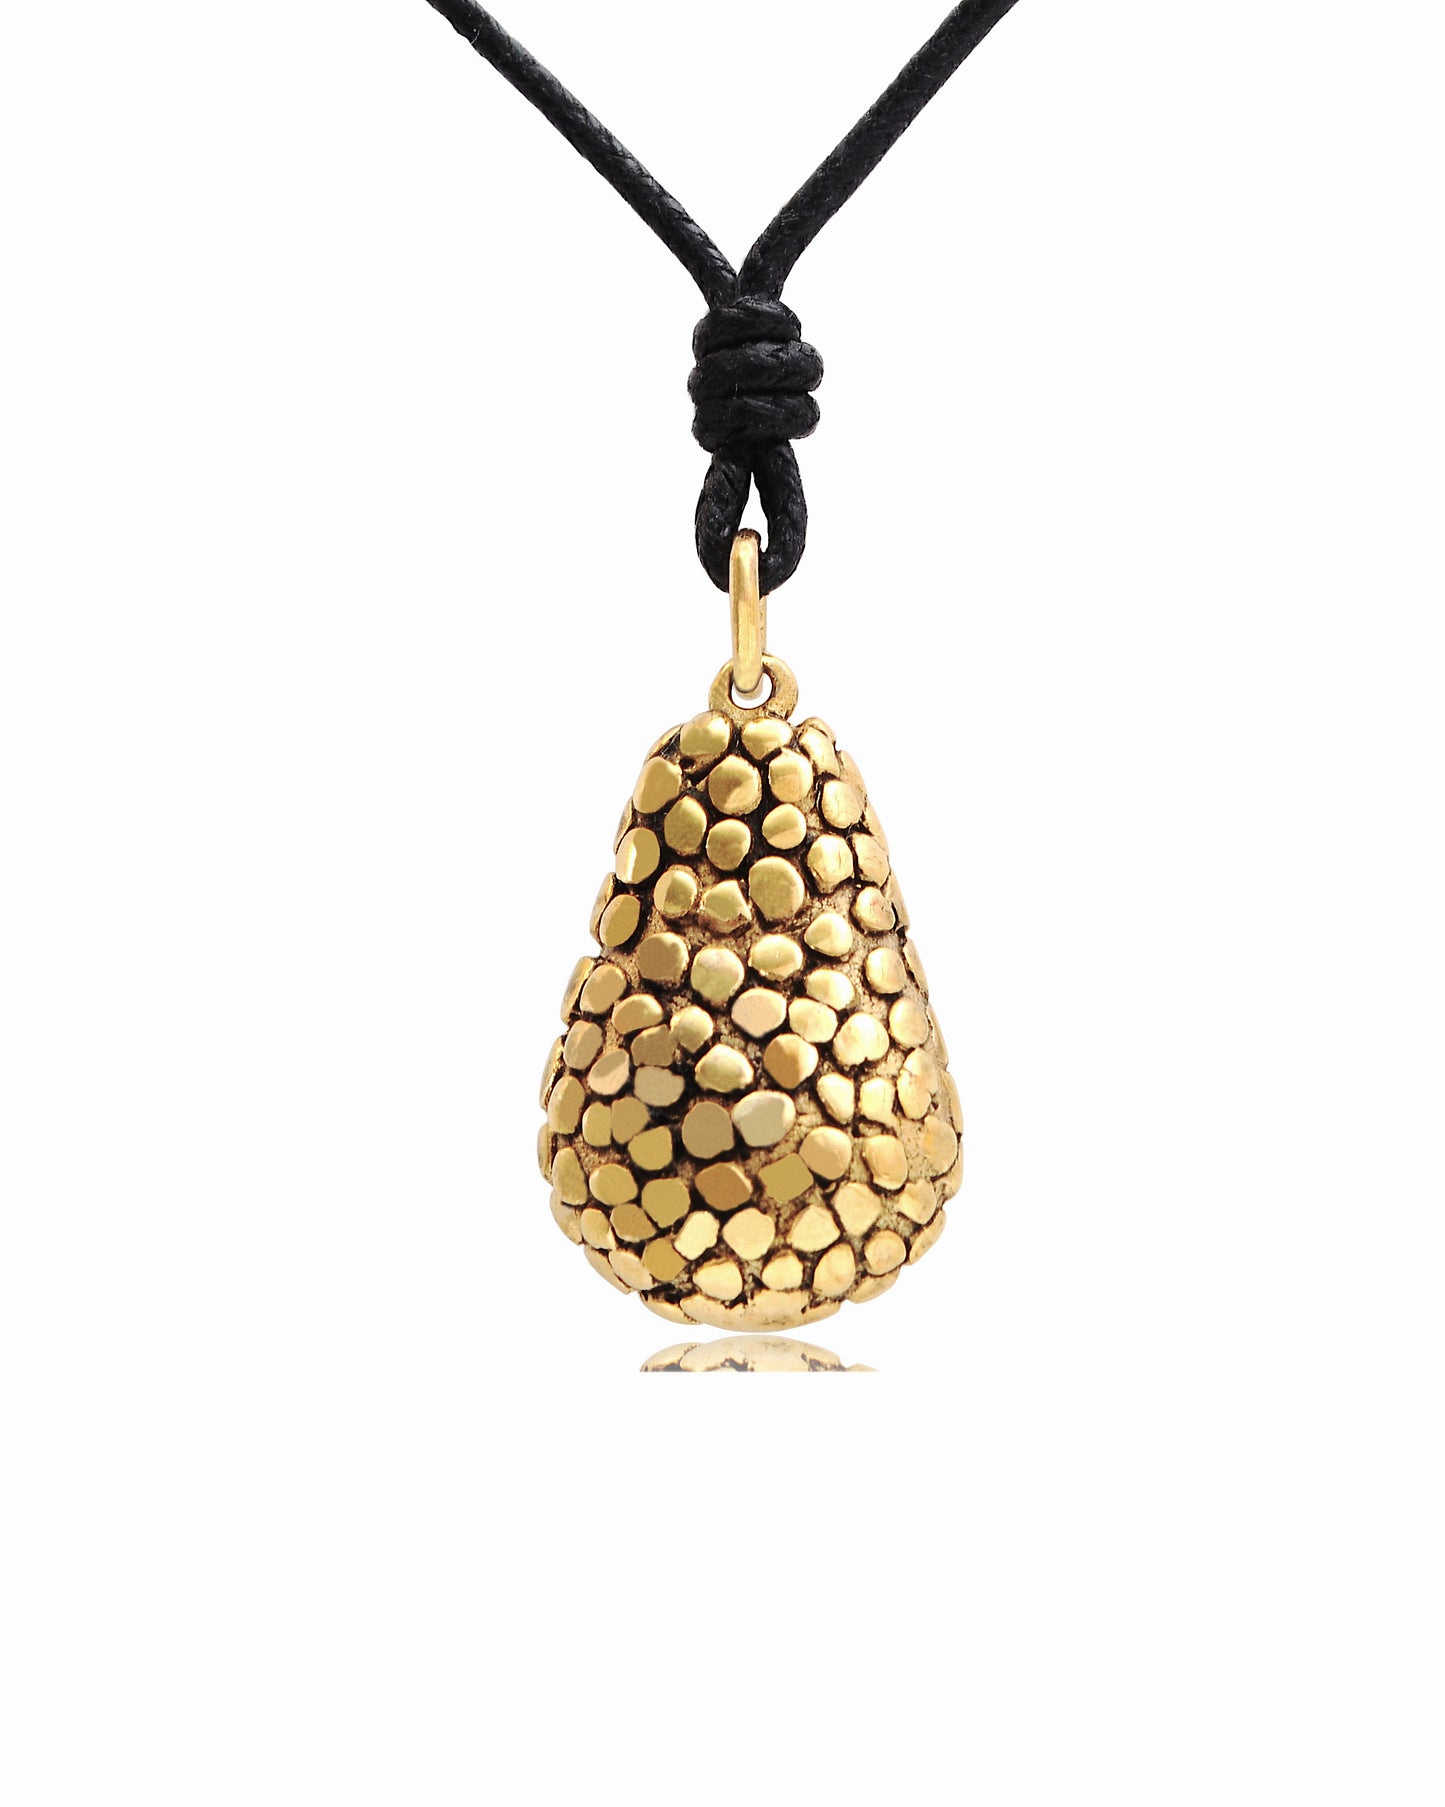 Avocado Fruit Pewter Silver Gold Brass Charm Necklace Pendent Jewelry